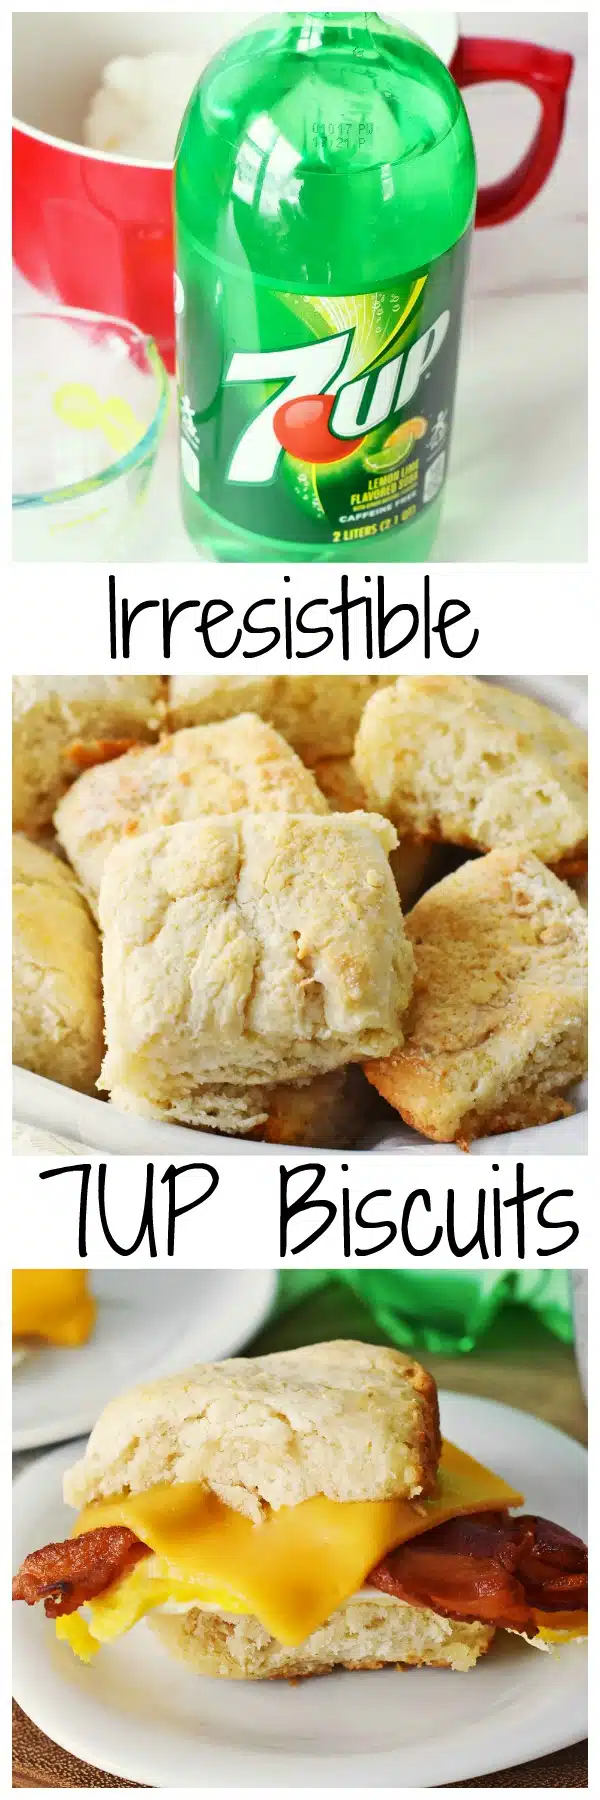 Irresistible 7UP biscuits Pin